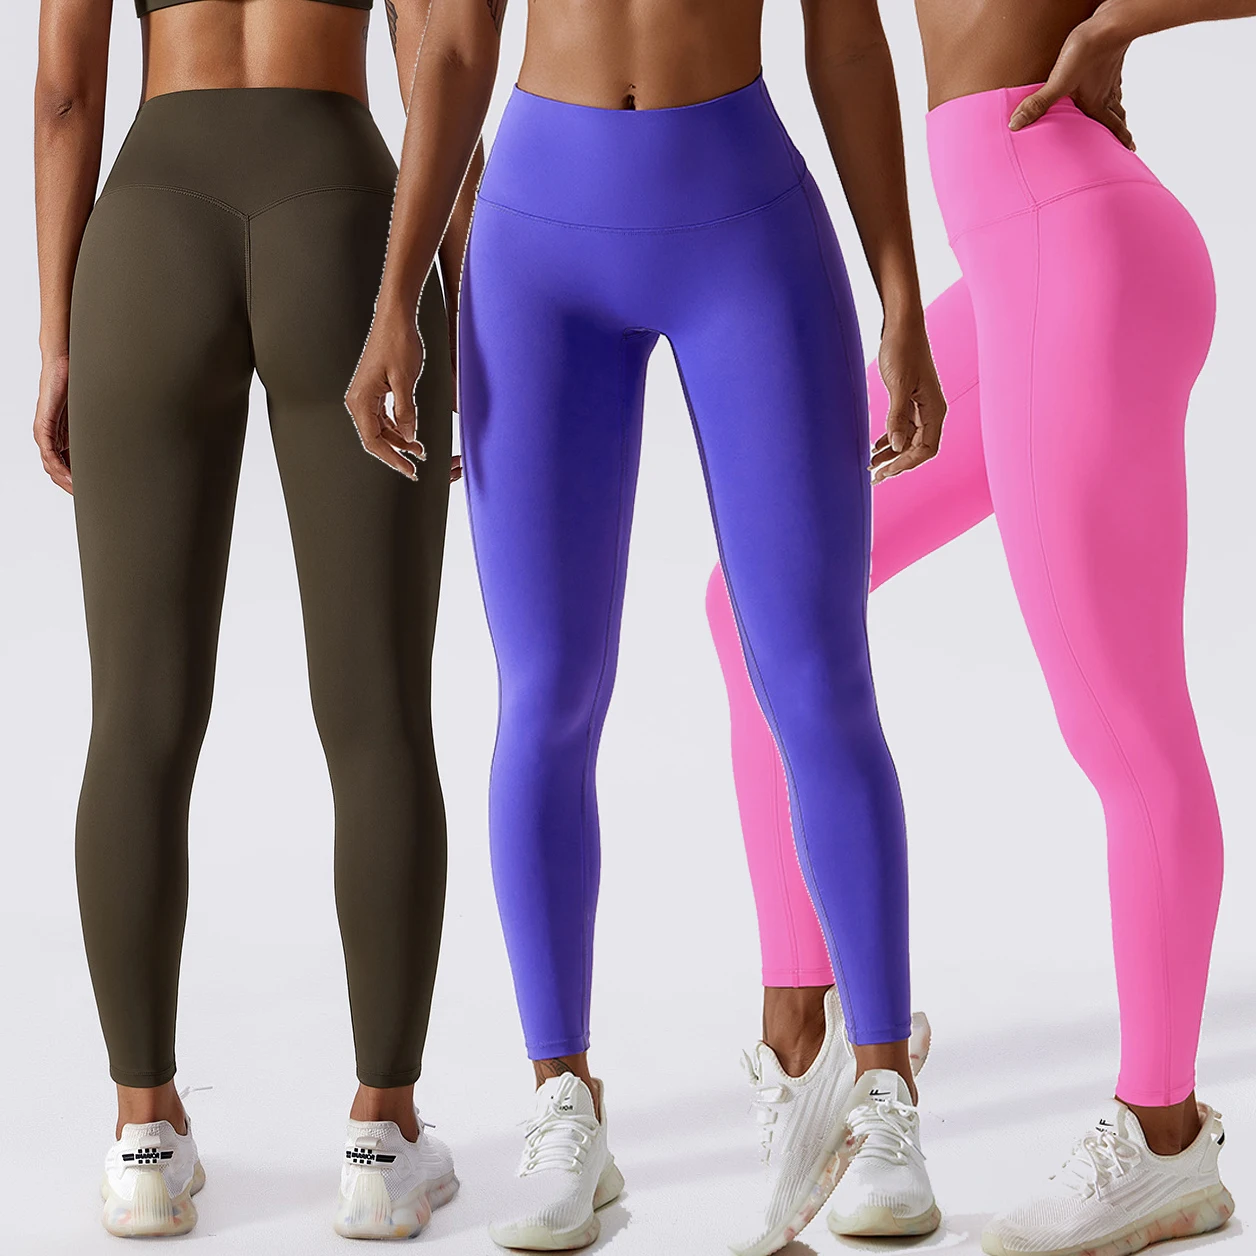 YIYI 13 Candy Colors Butt Lift Gym Leggings For Girls High Elastic Athletic Tights Pants Quick Dry Leggings Yoga